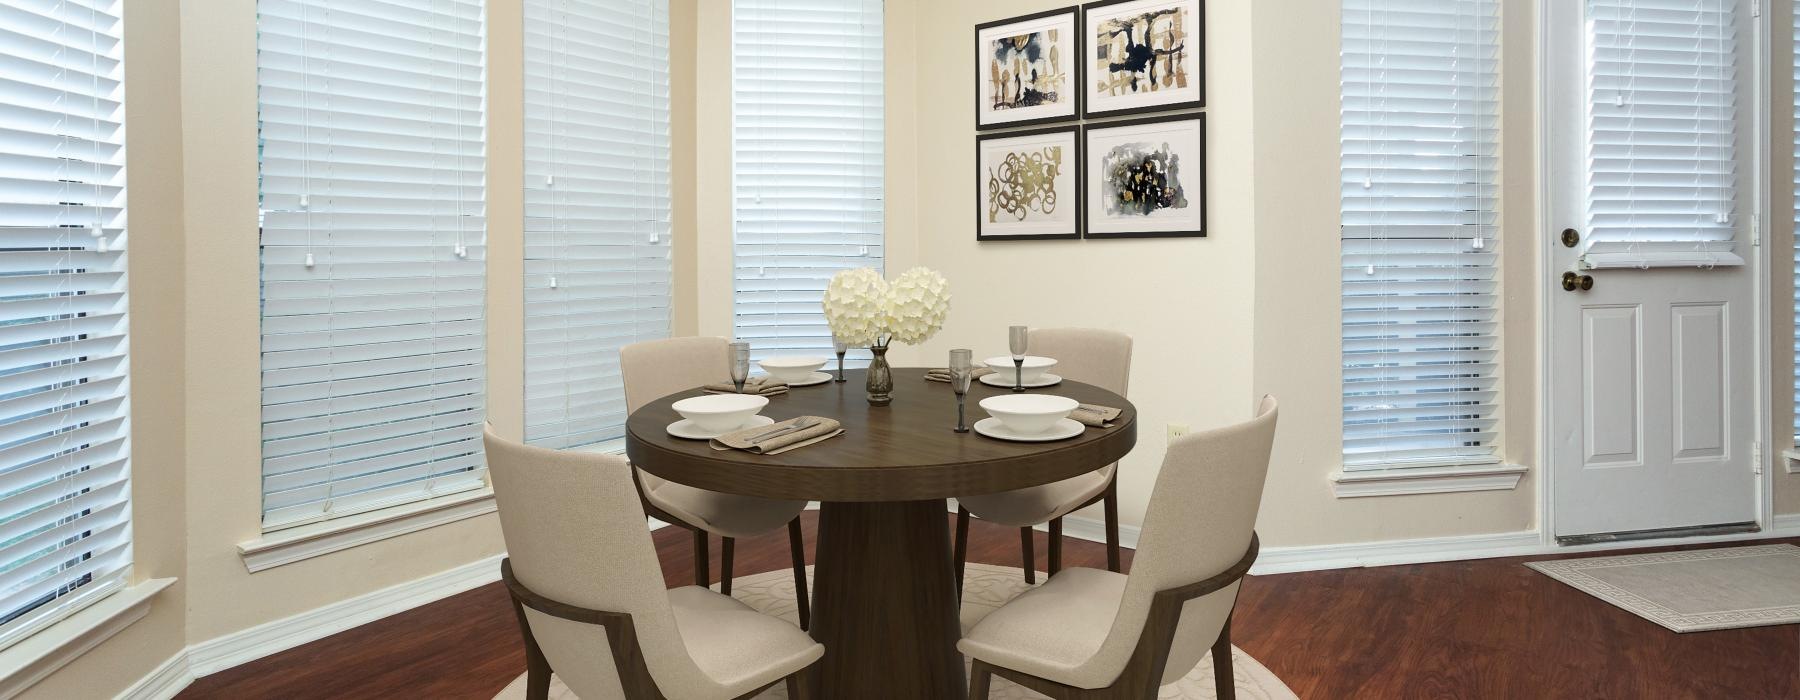 a dining room table with white chairs